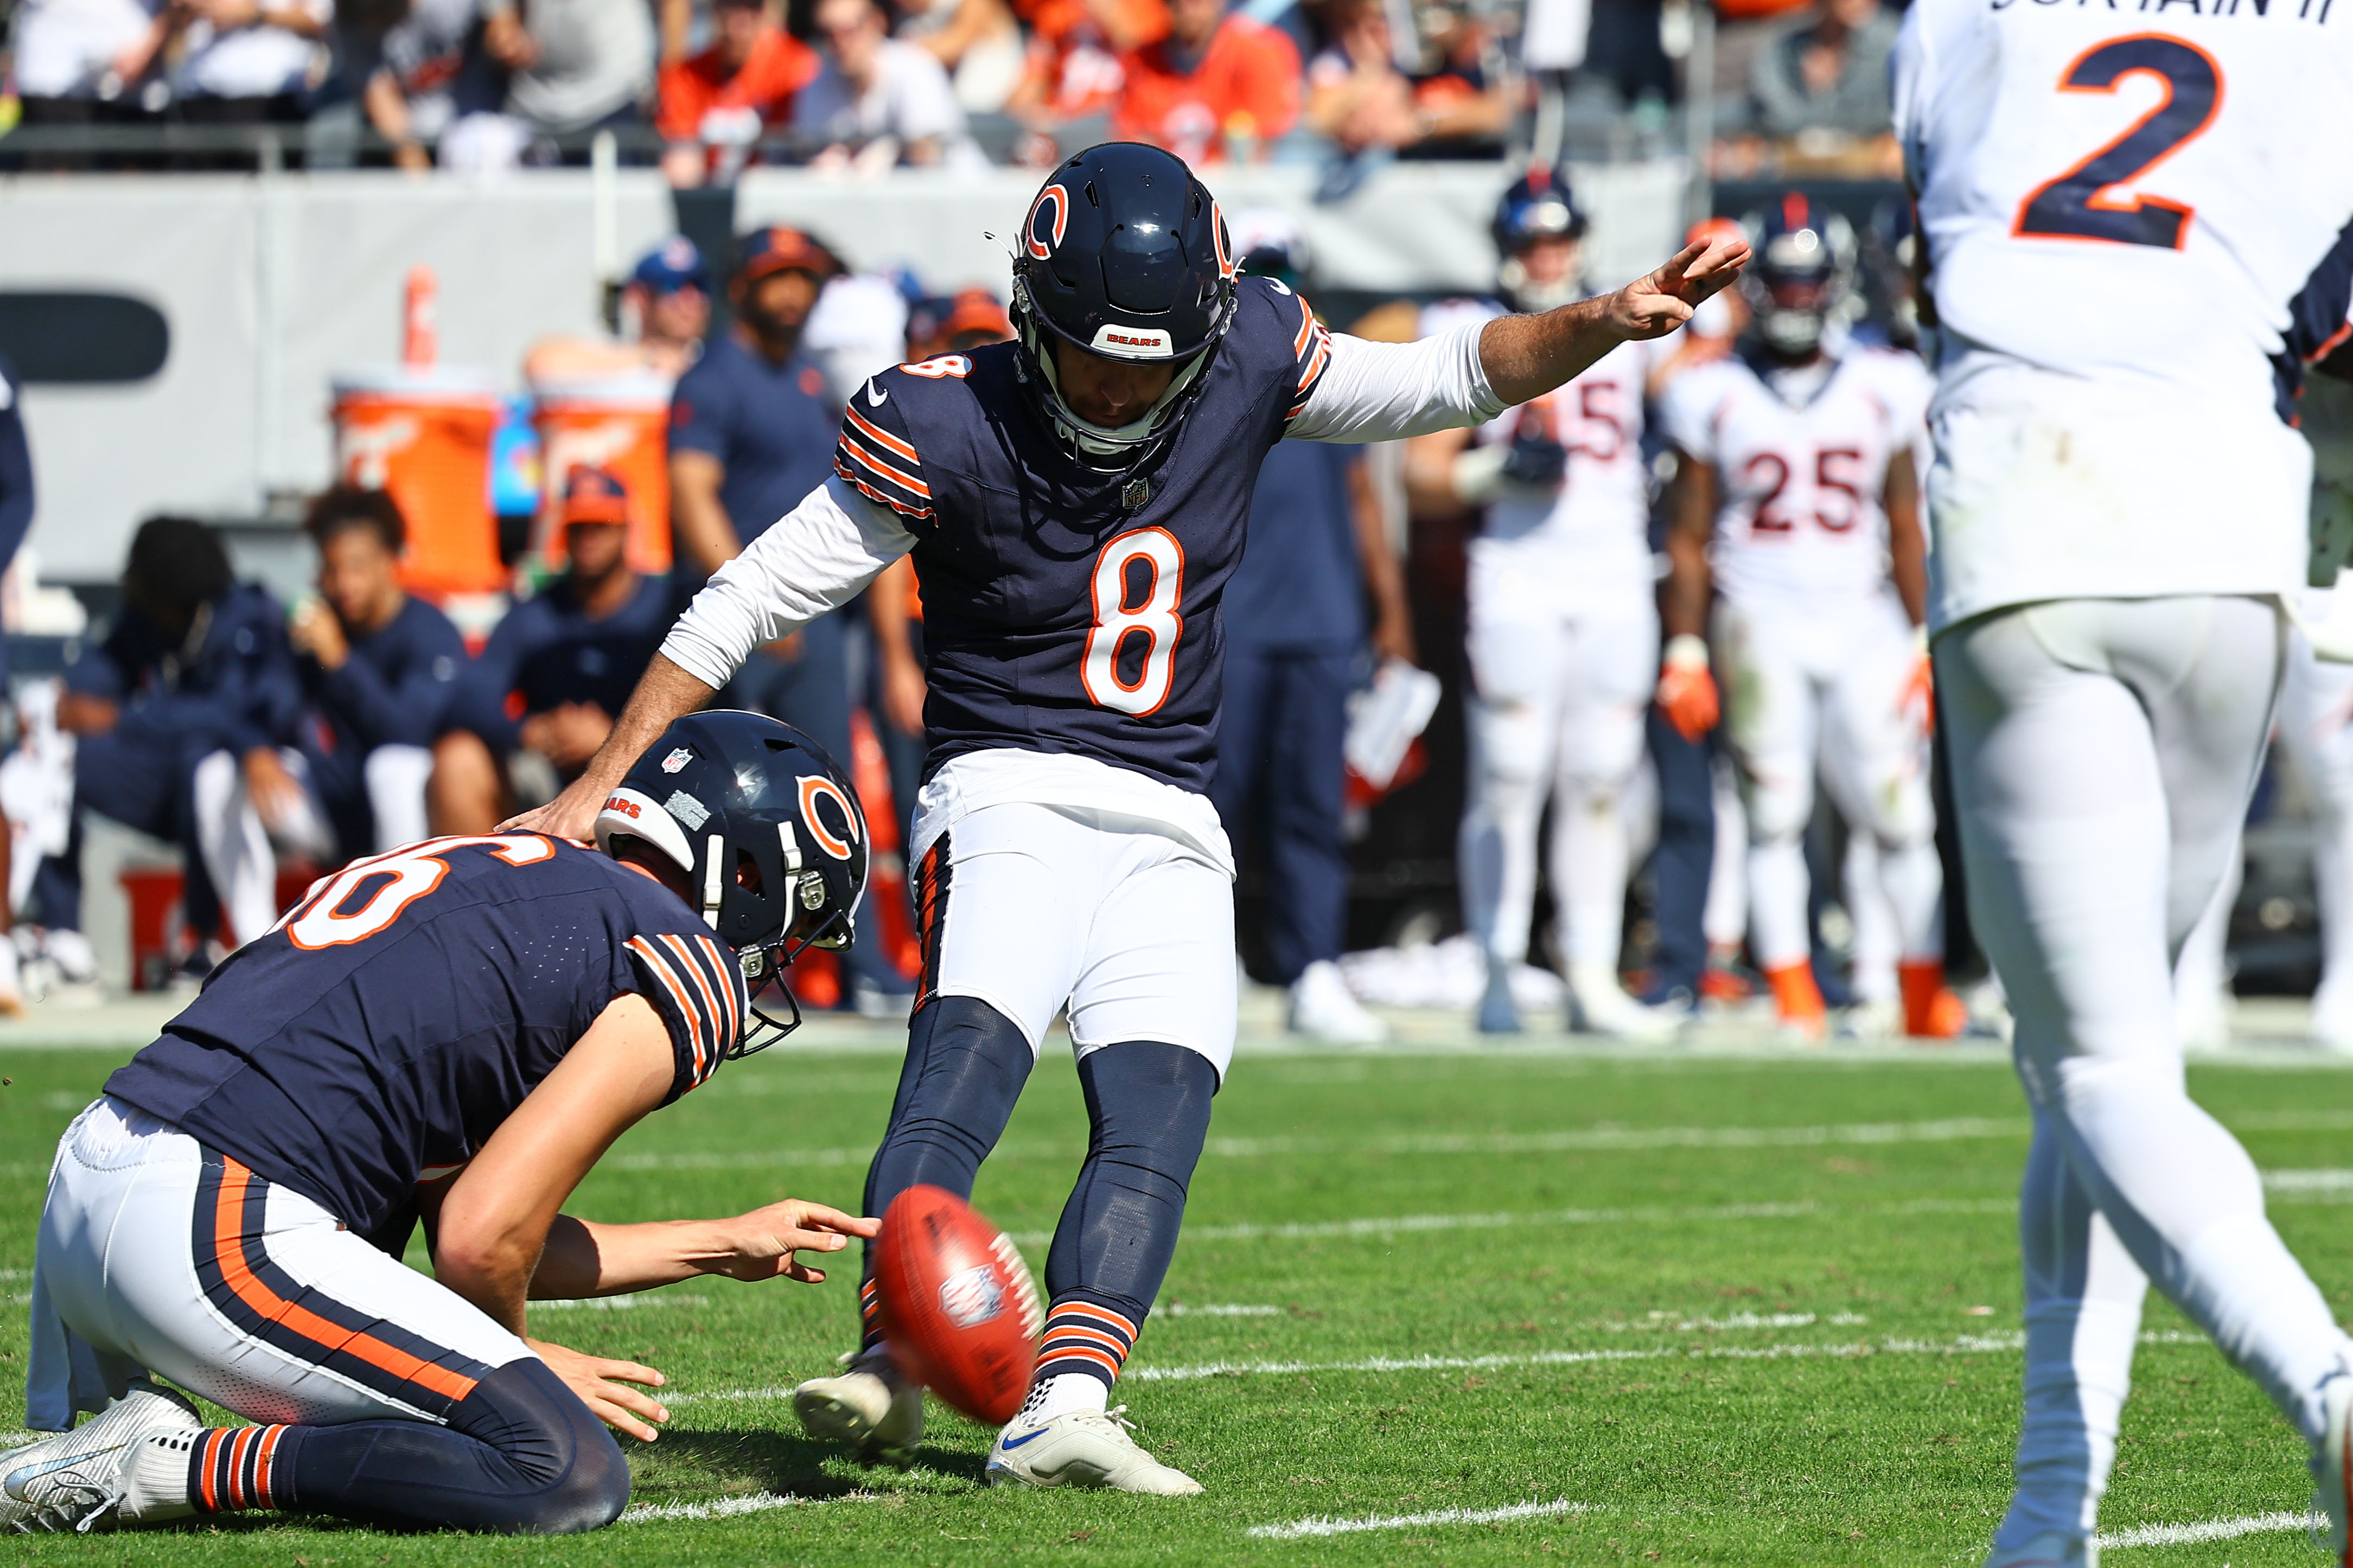 Chicago Bears Schedule, News, Roster and Stats